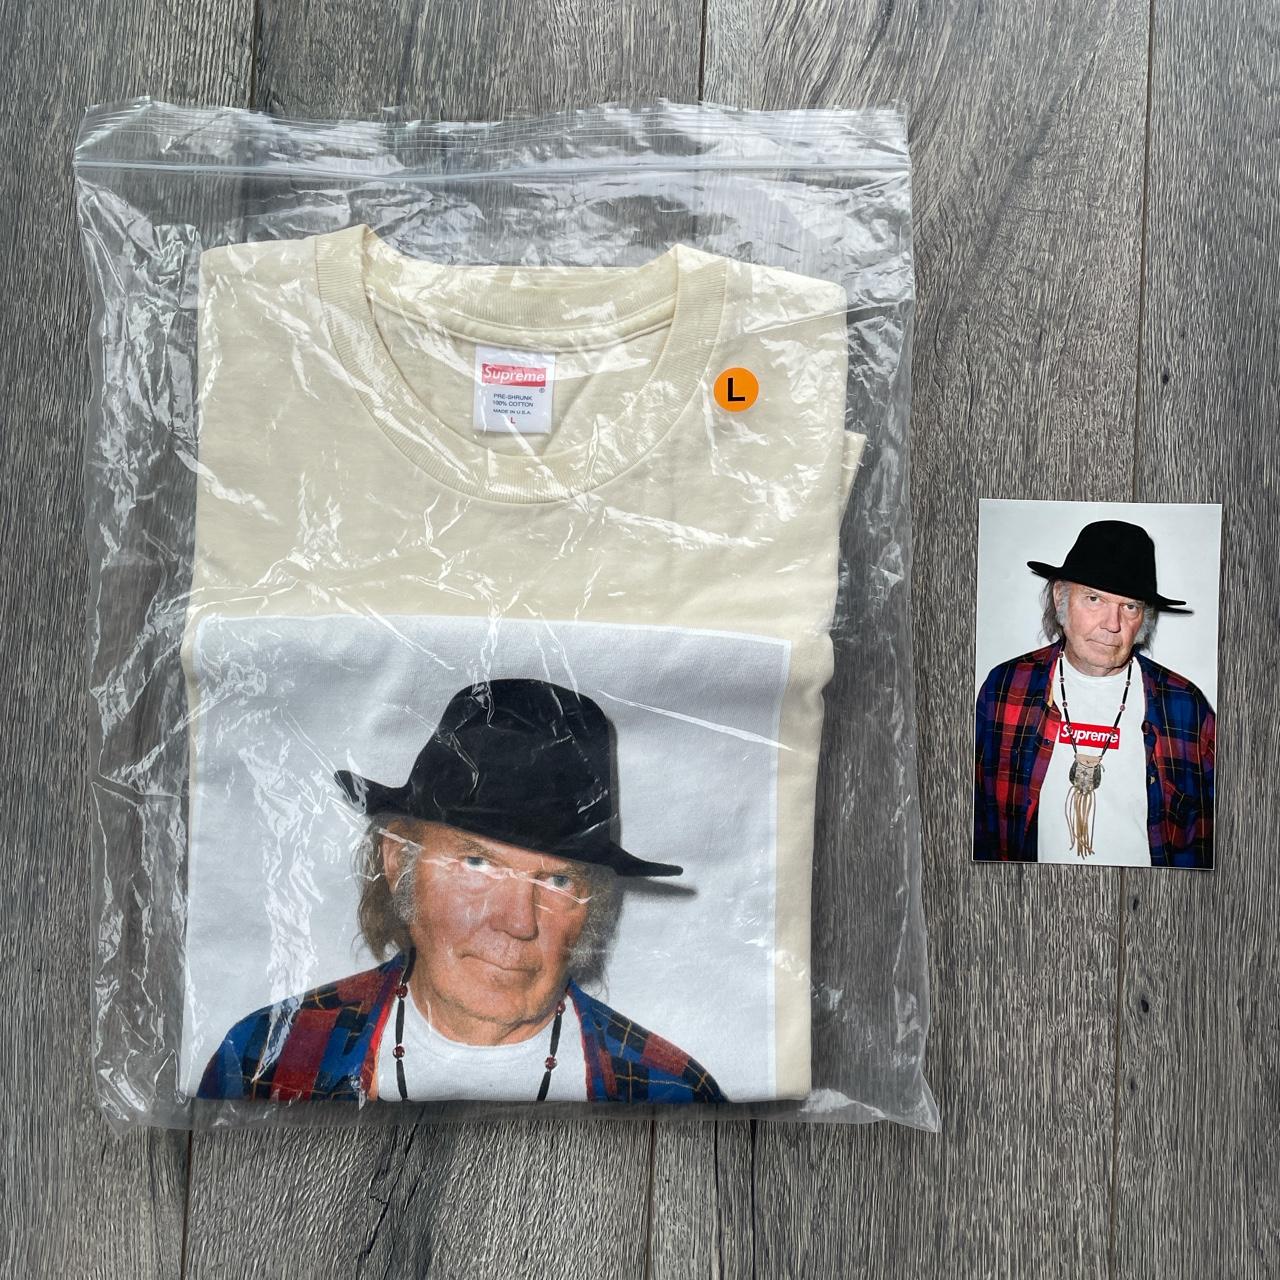 Supreme Neil Young Tee Shirt & Sticker., Worn once...